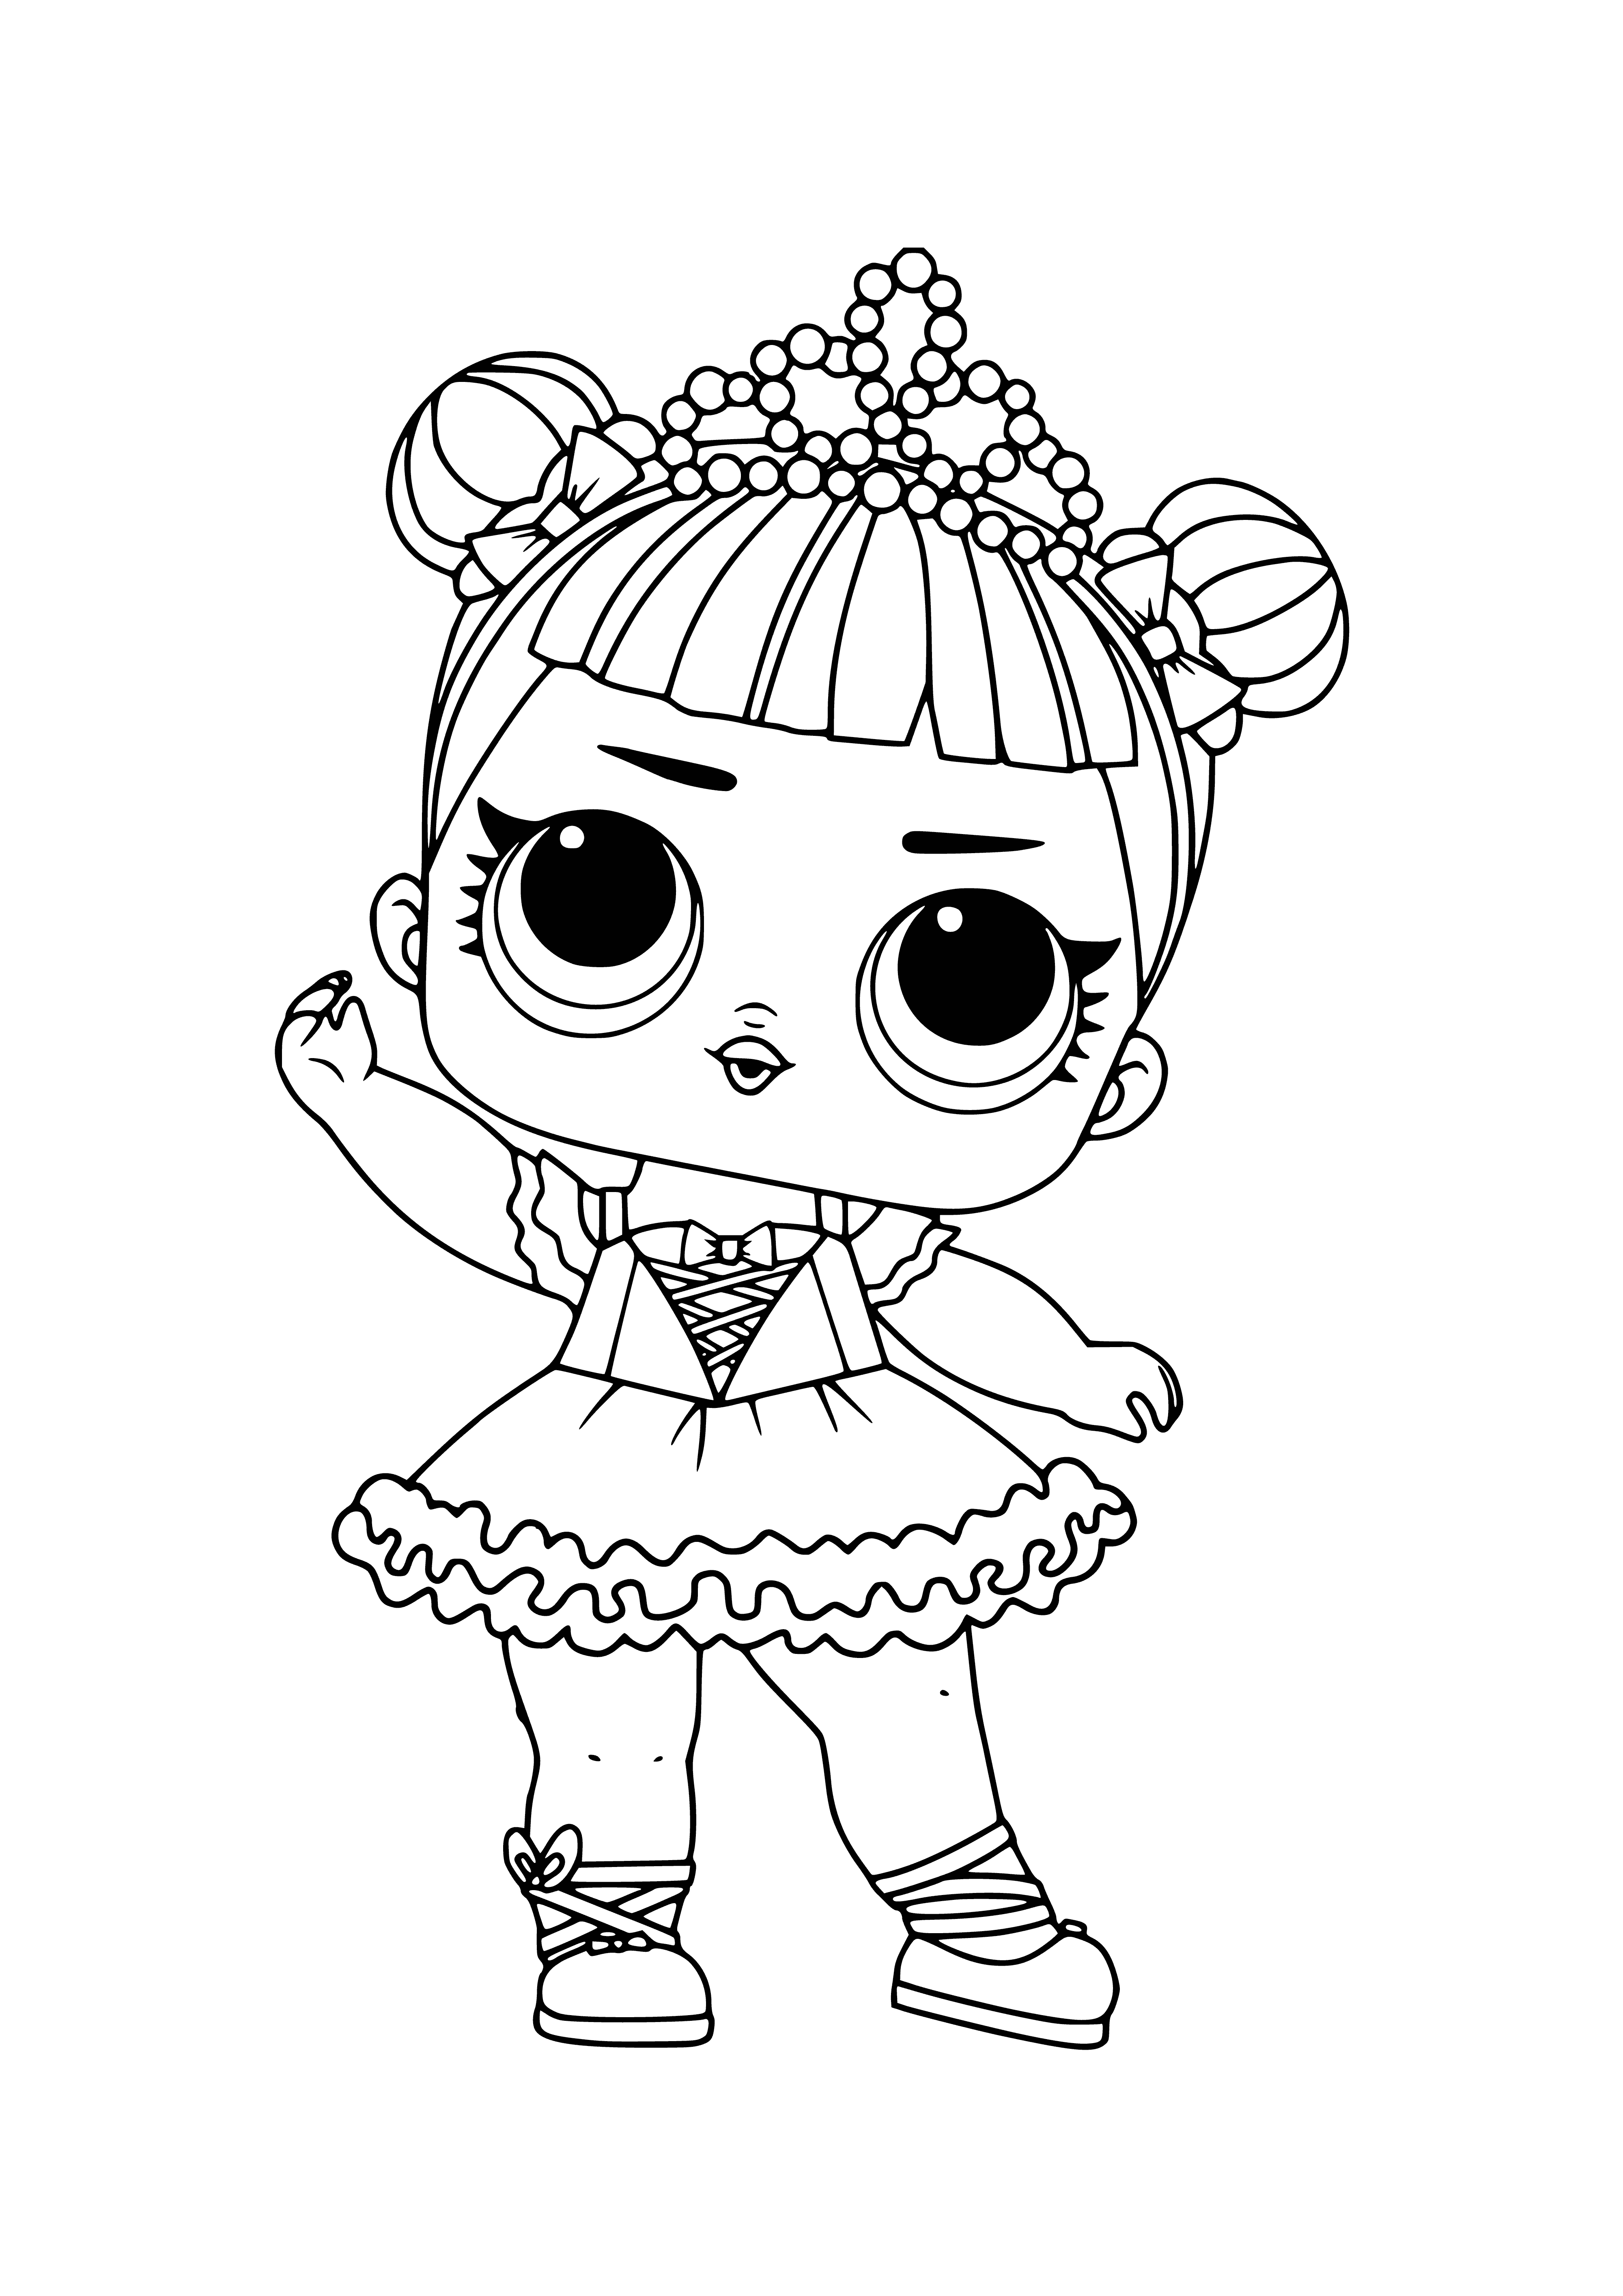 coloring page: Ballerina in pink tutu dances to classical music on stage, curtain pulled back to reveal her. #Beauty #Theatre #Dancing